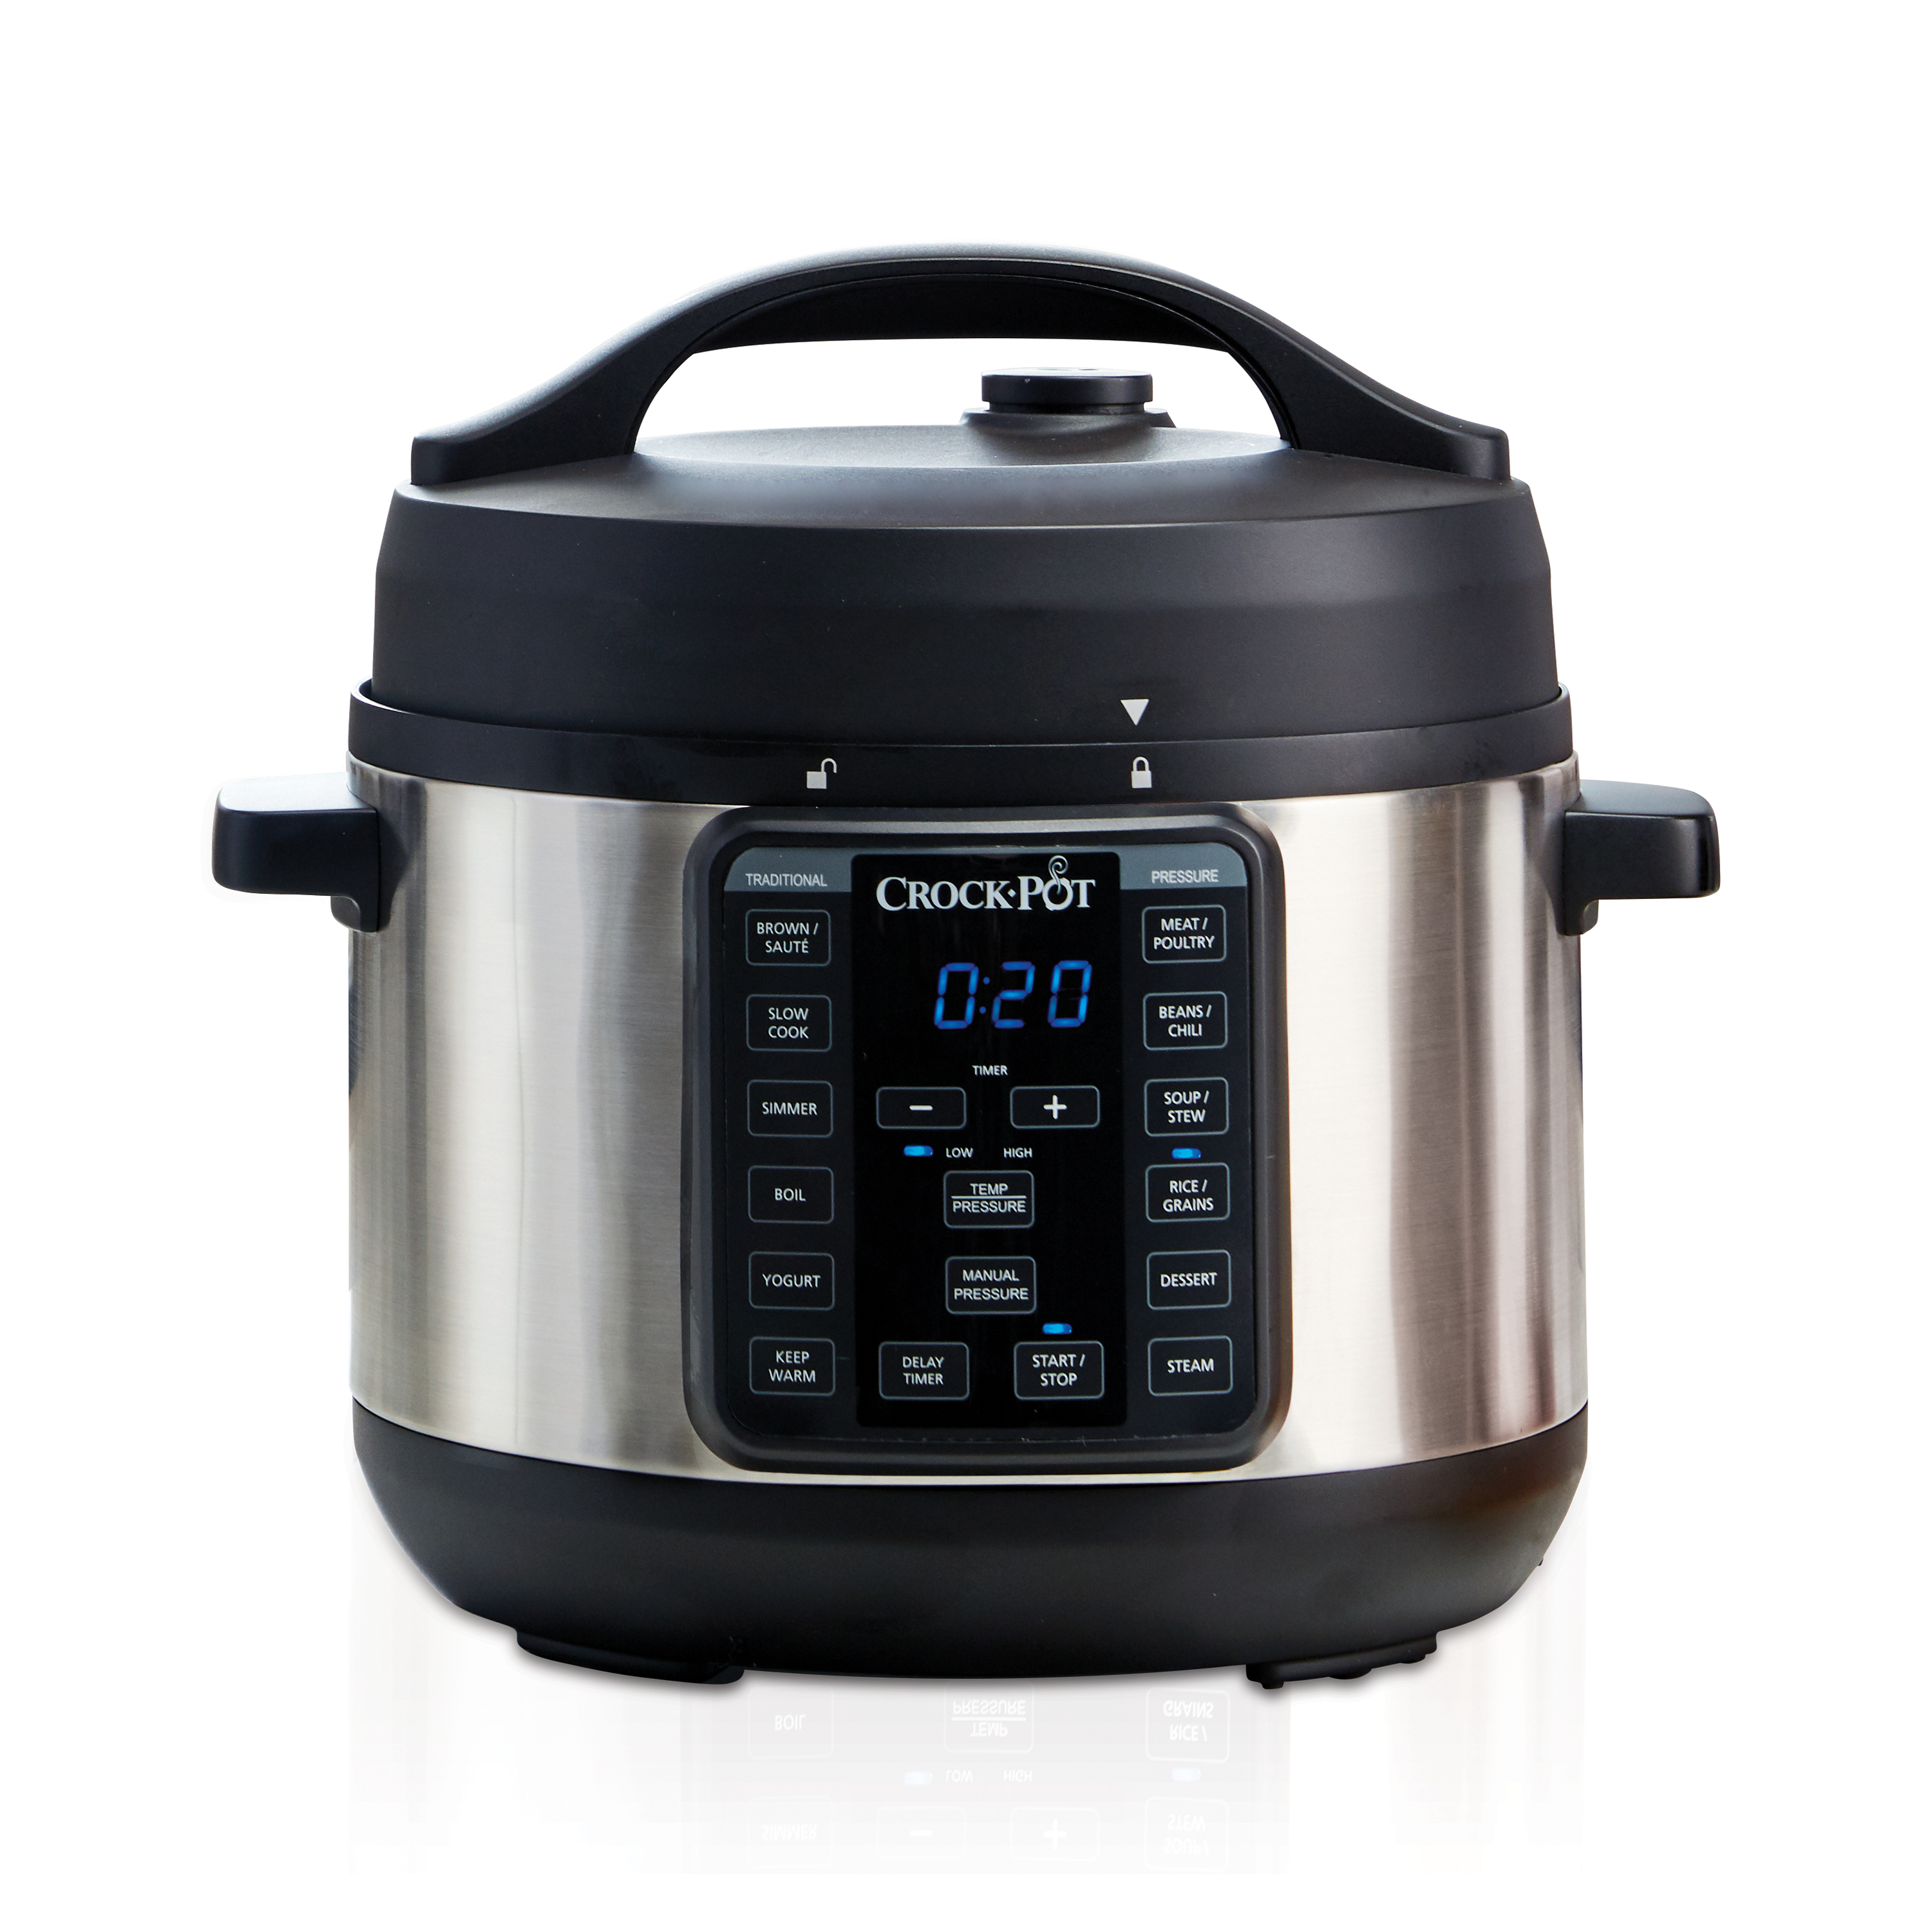 Crock-Pot 4 Quart 8-in-1 Multi-Use Express Crock Programmable Slow Cooker, Pressure Cooker, Sauté, and Steamer in Silver - image 1 of 9